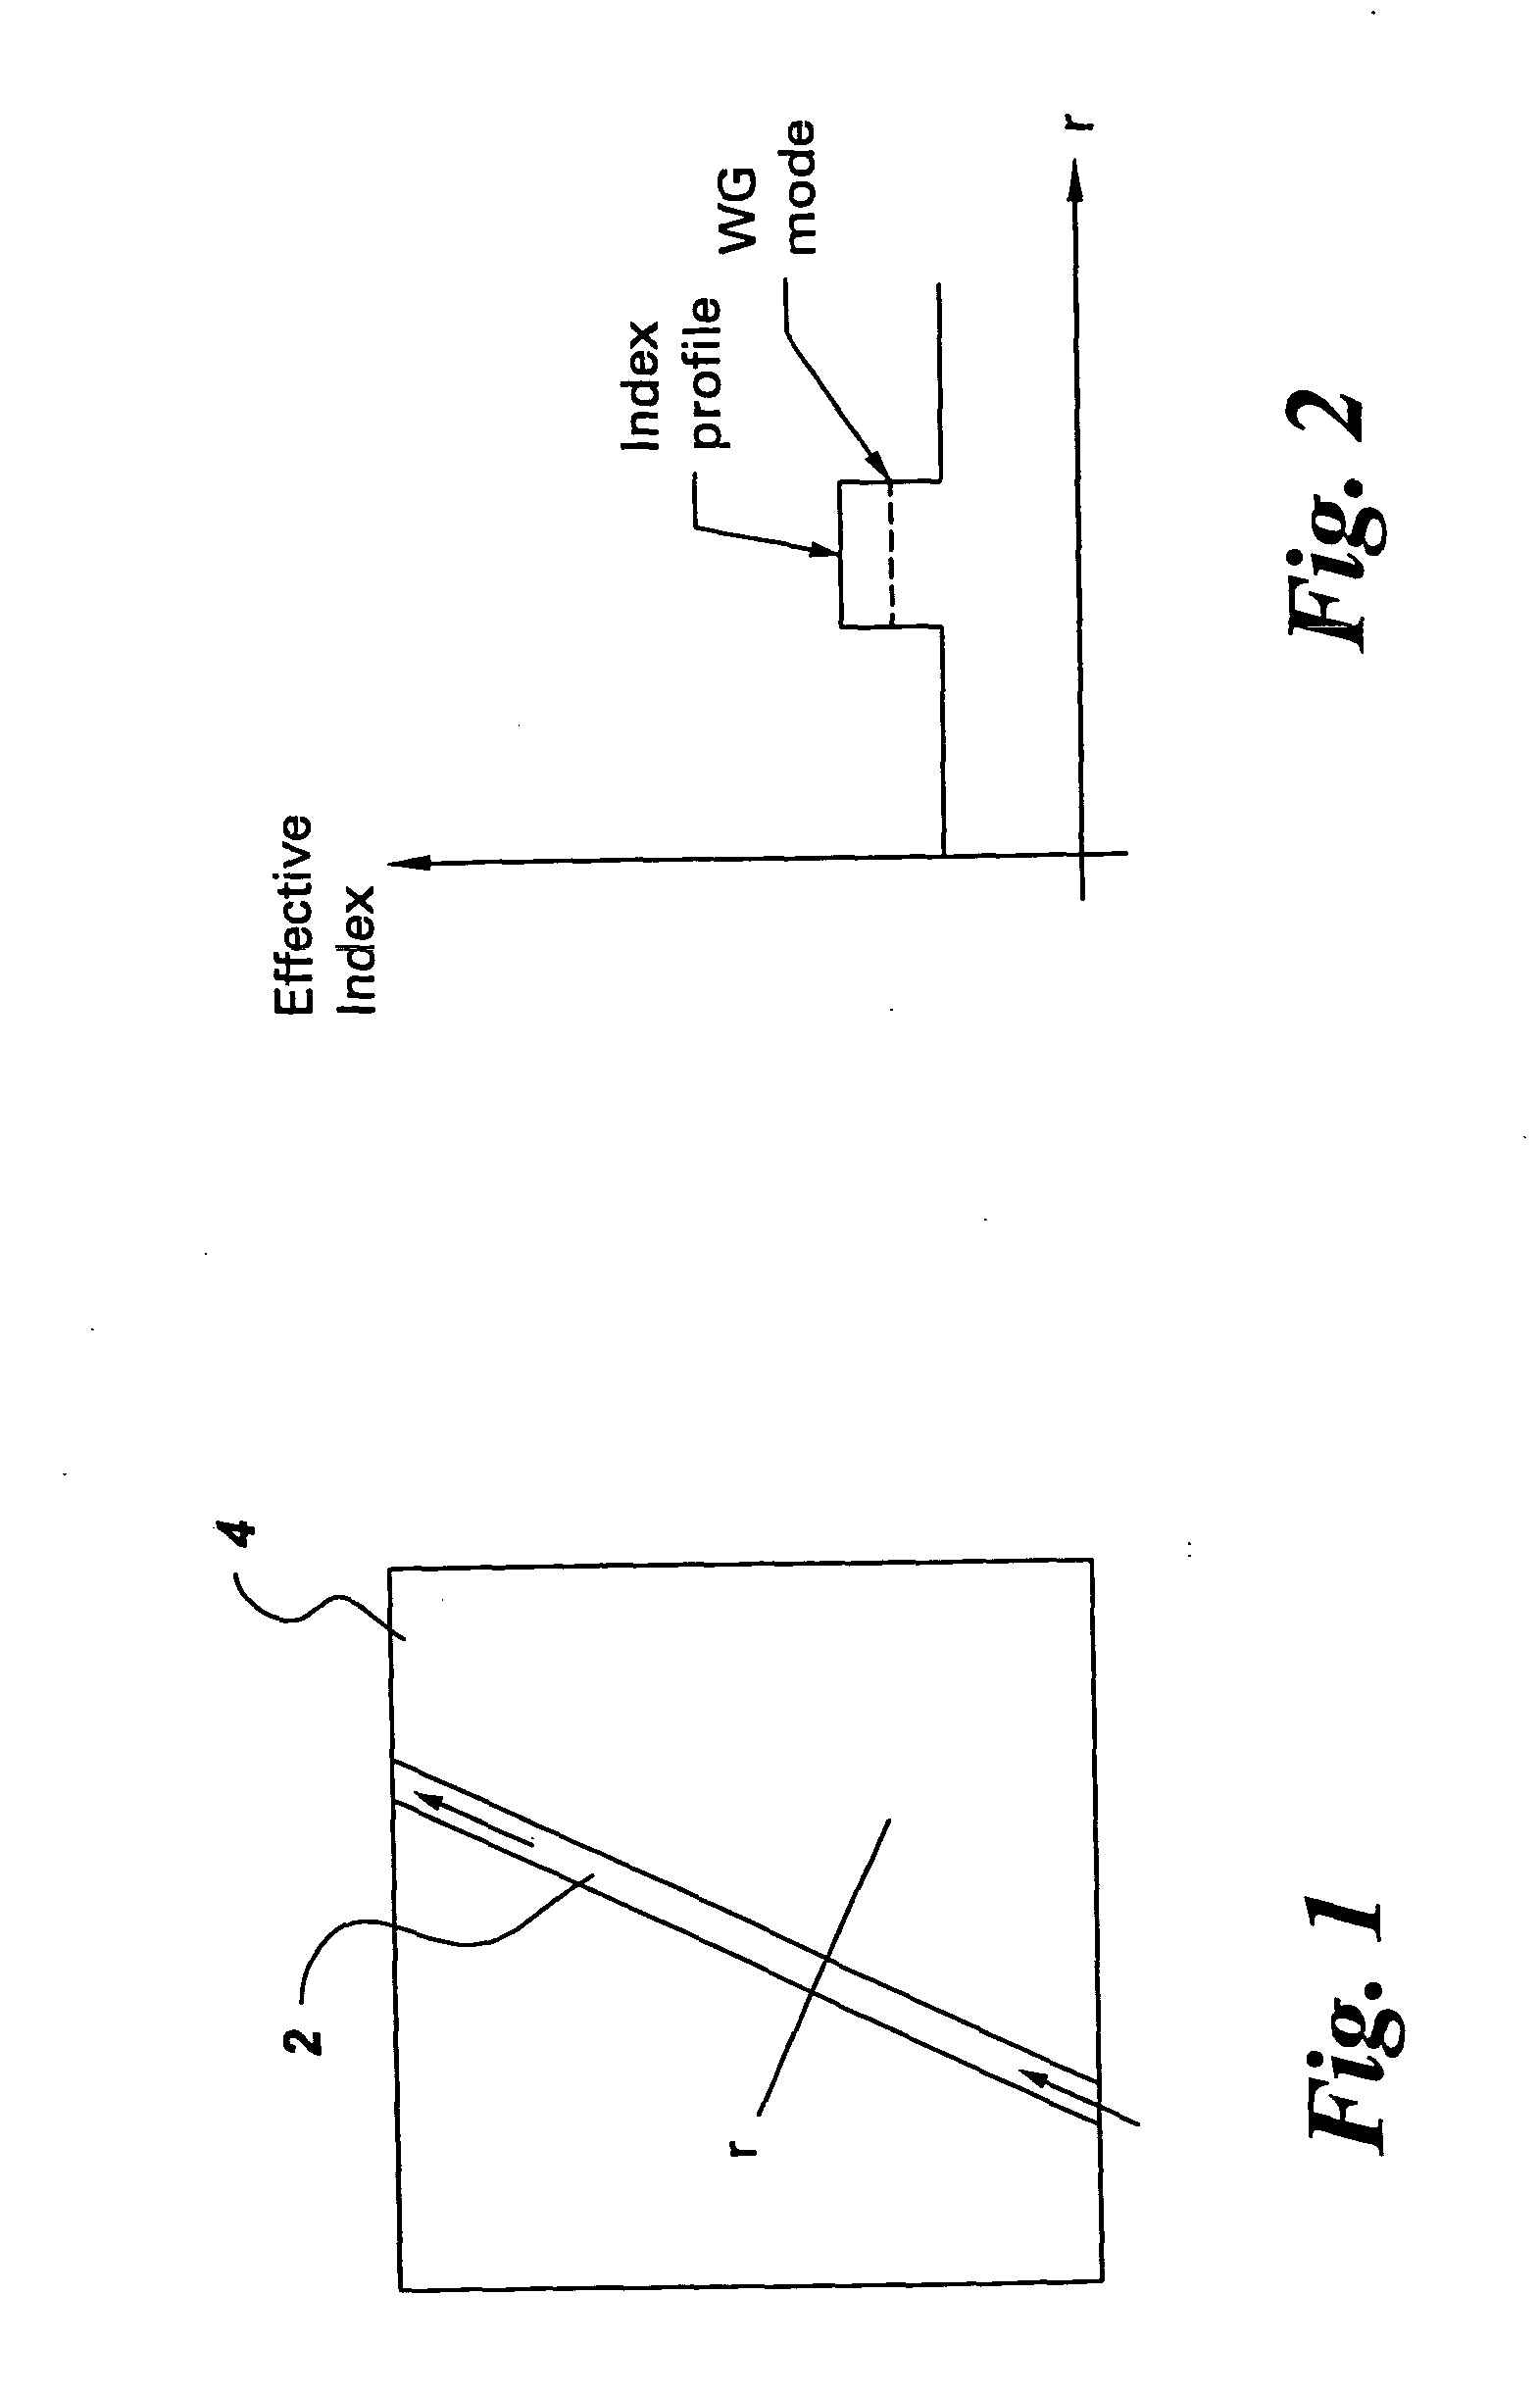 Index contrast enhanced optical waveguides and fabrication methods